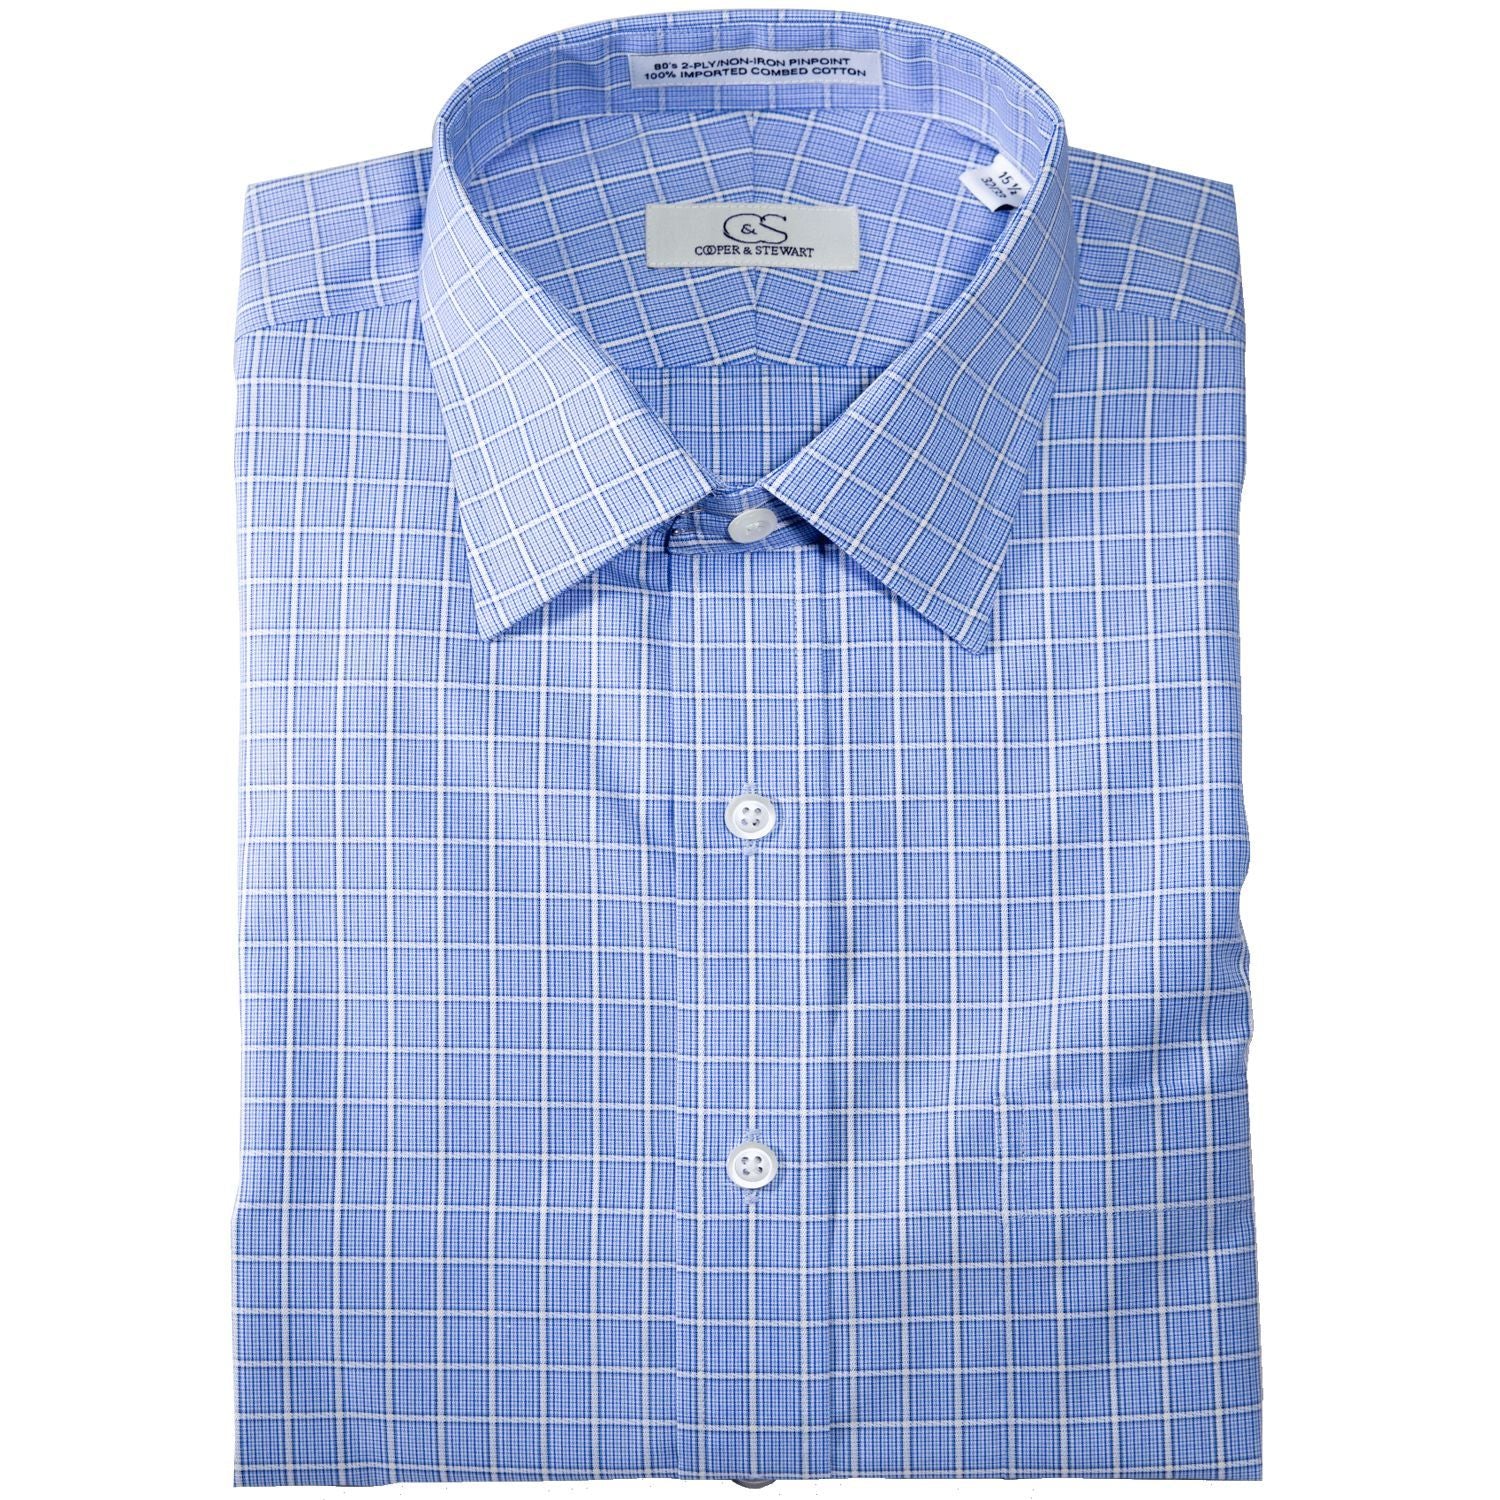 The Medina - Wrinkle-Free Overlay Check Cotton Dress Shirt in Blue by Cooper & Stewart